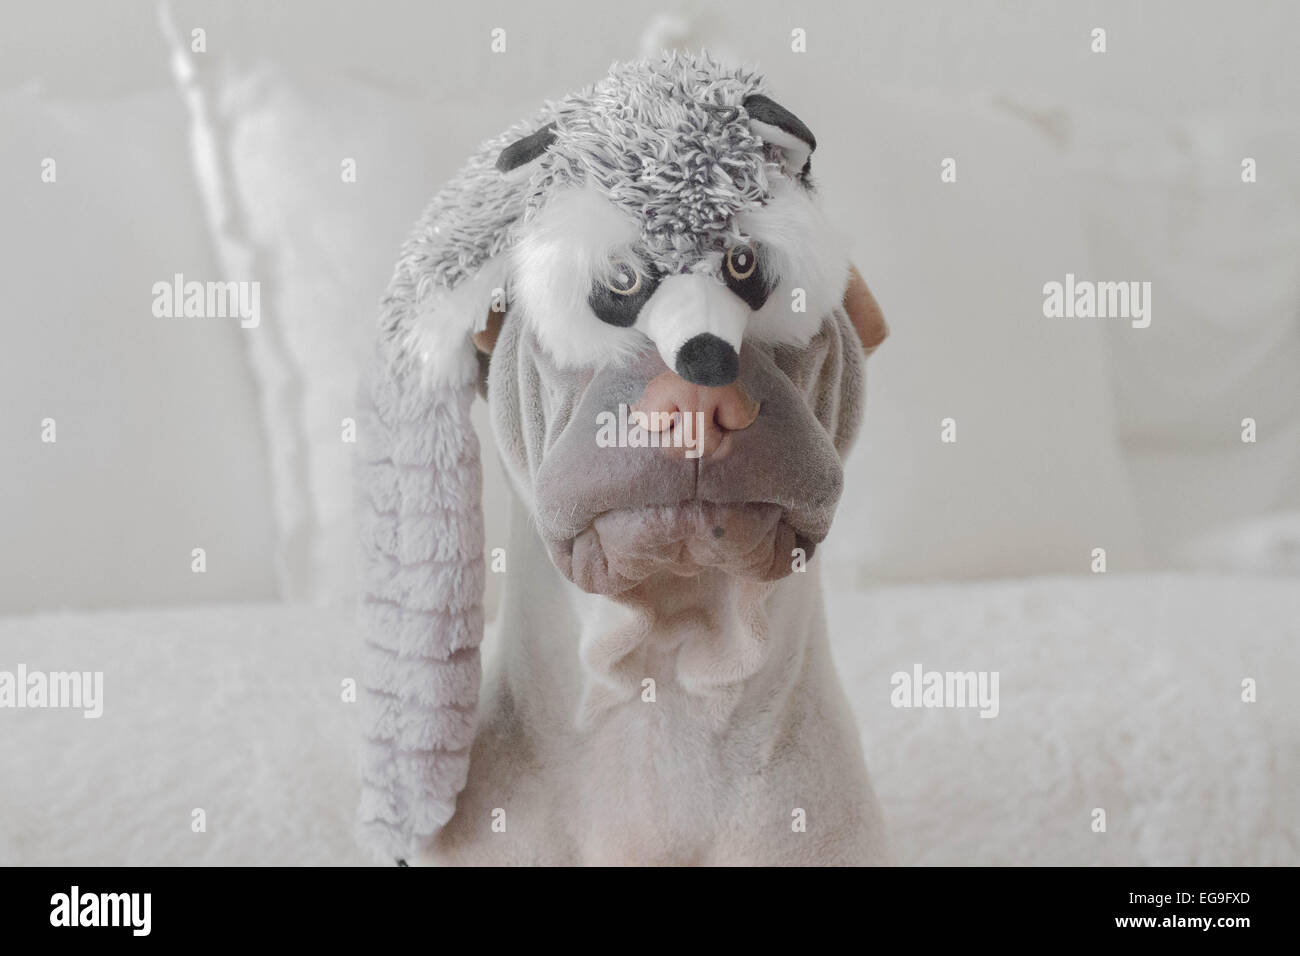 Portrait of shar pei dog with a toy raccoon on his head Stock Photo